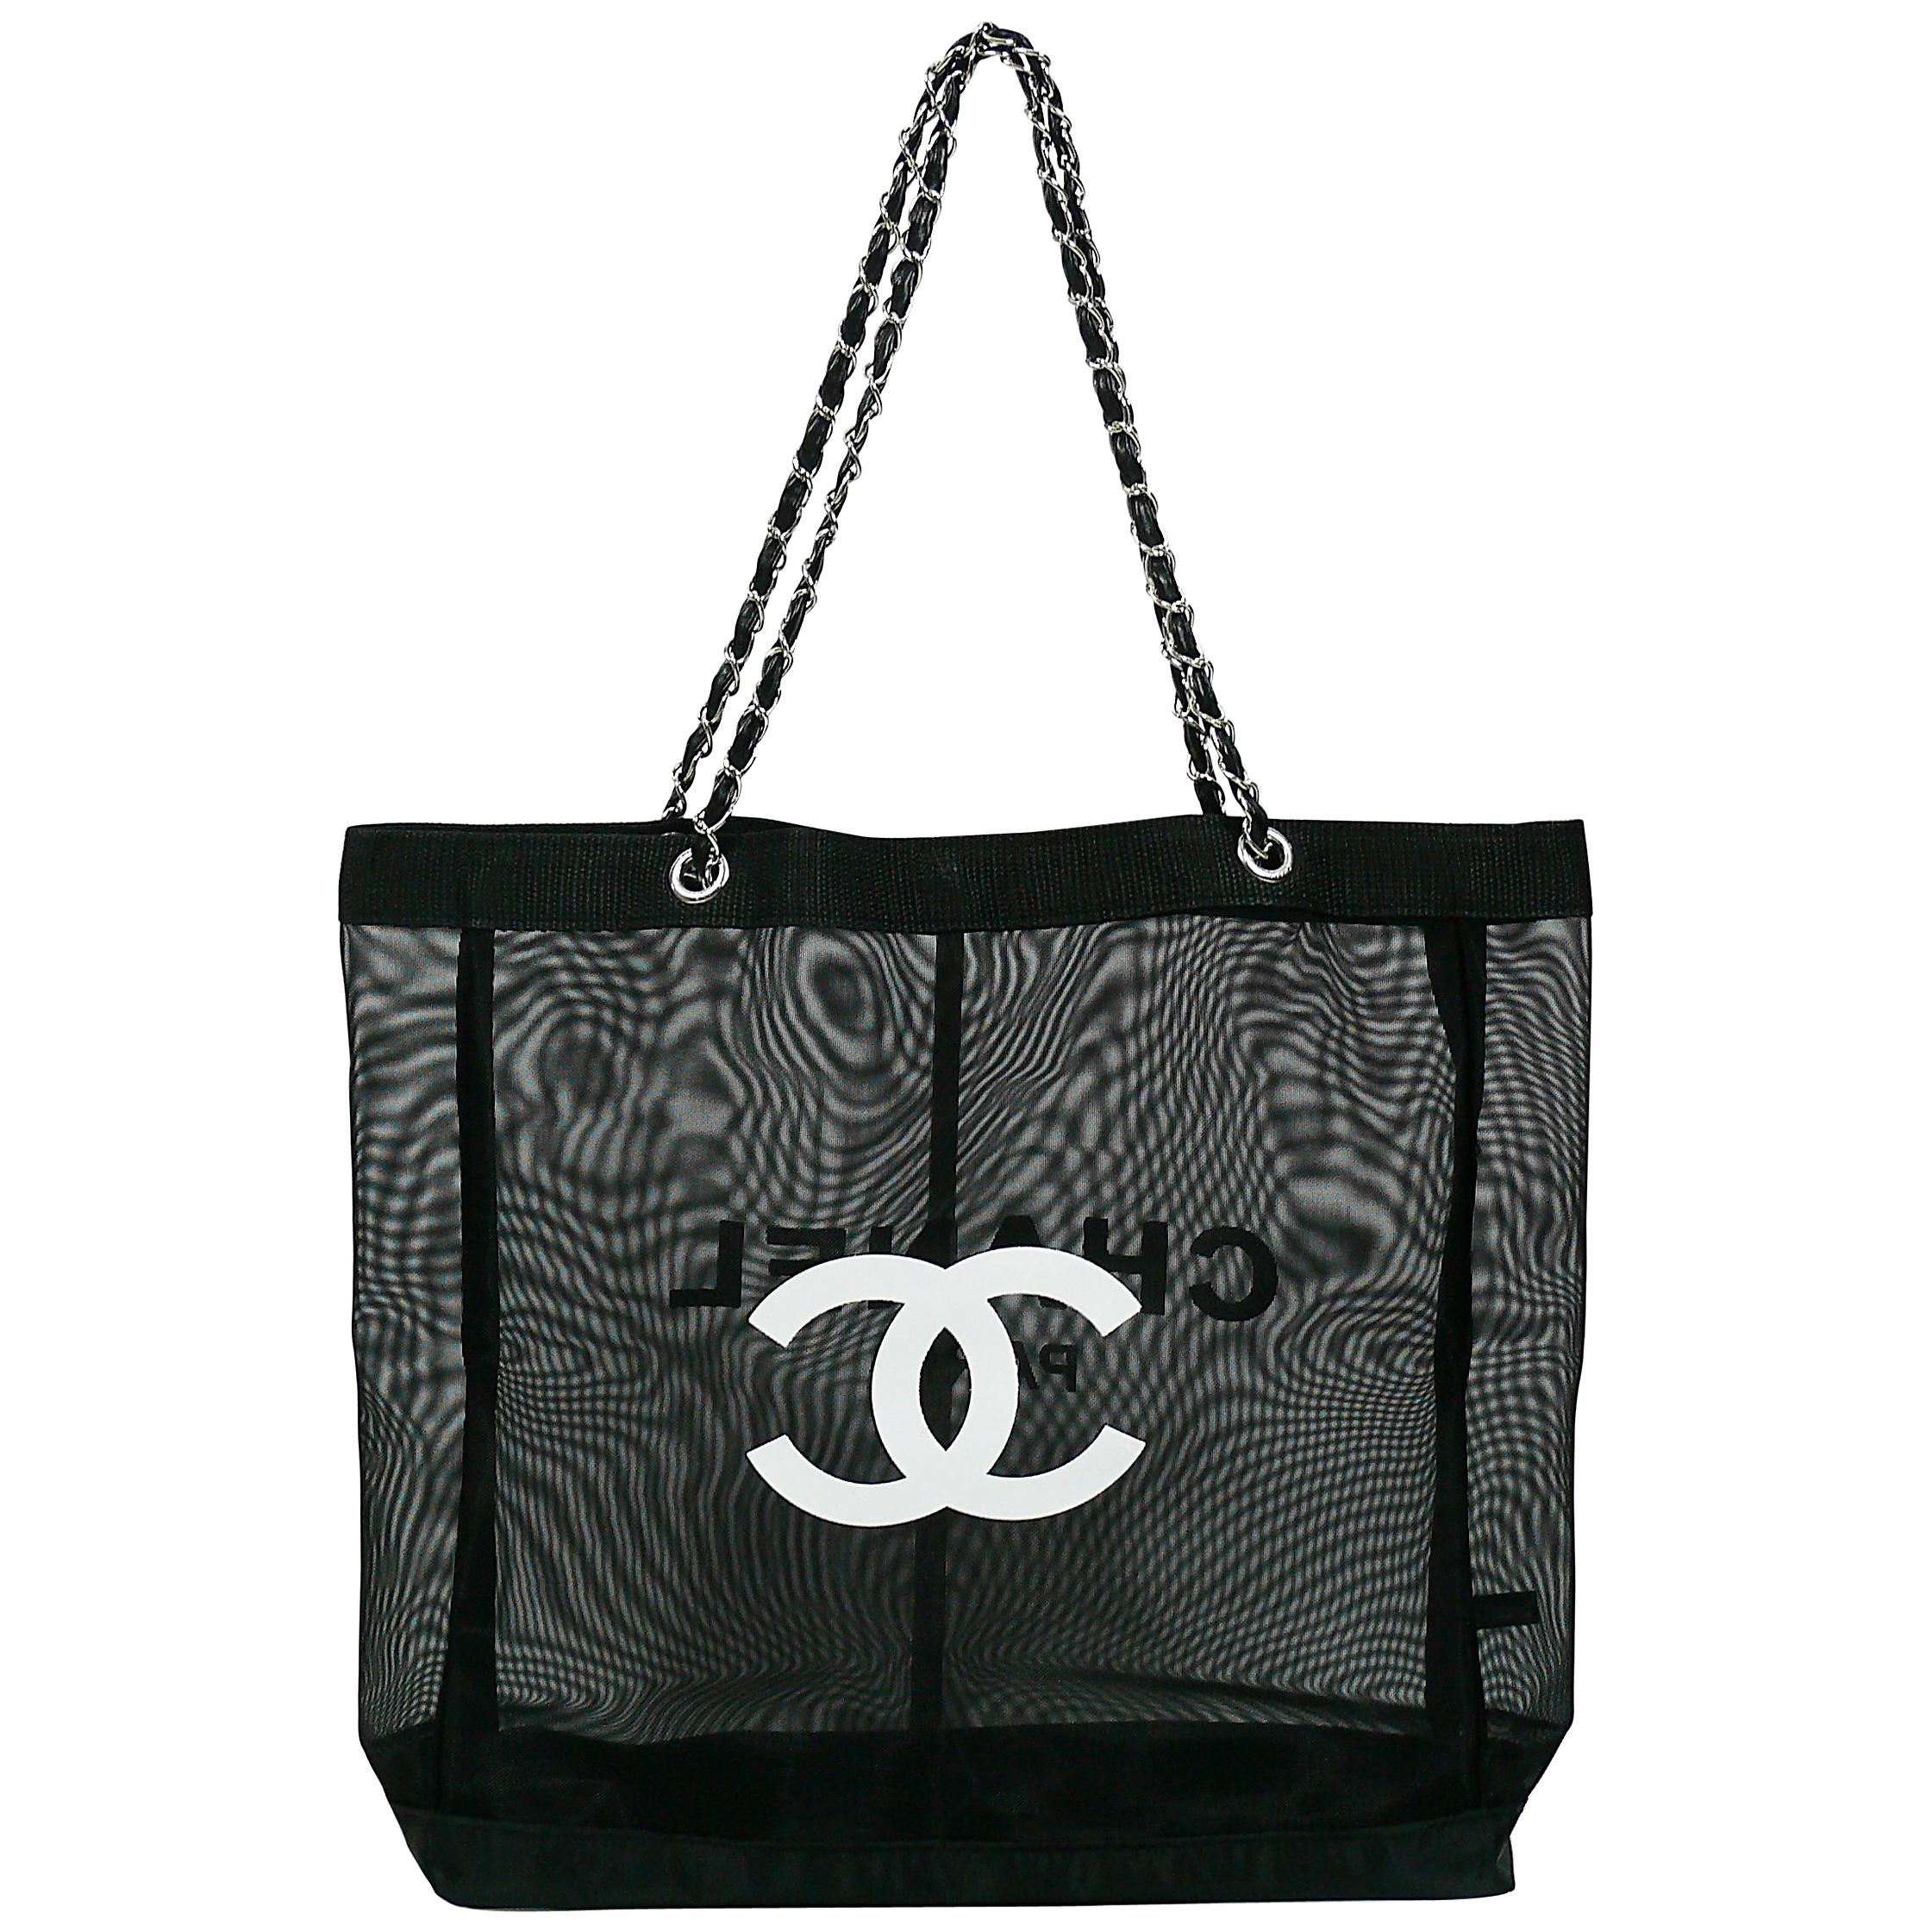 Chanel HOLD black Gift mesh Tote Beach Bag Purse - $228 New With Tags -  From Upcycled